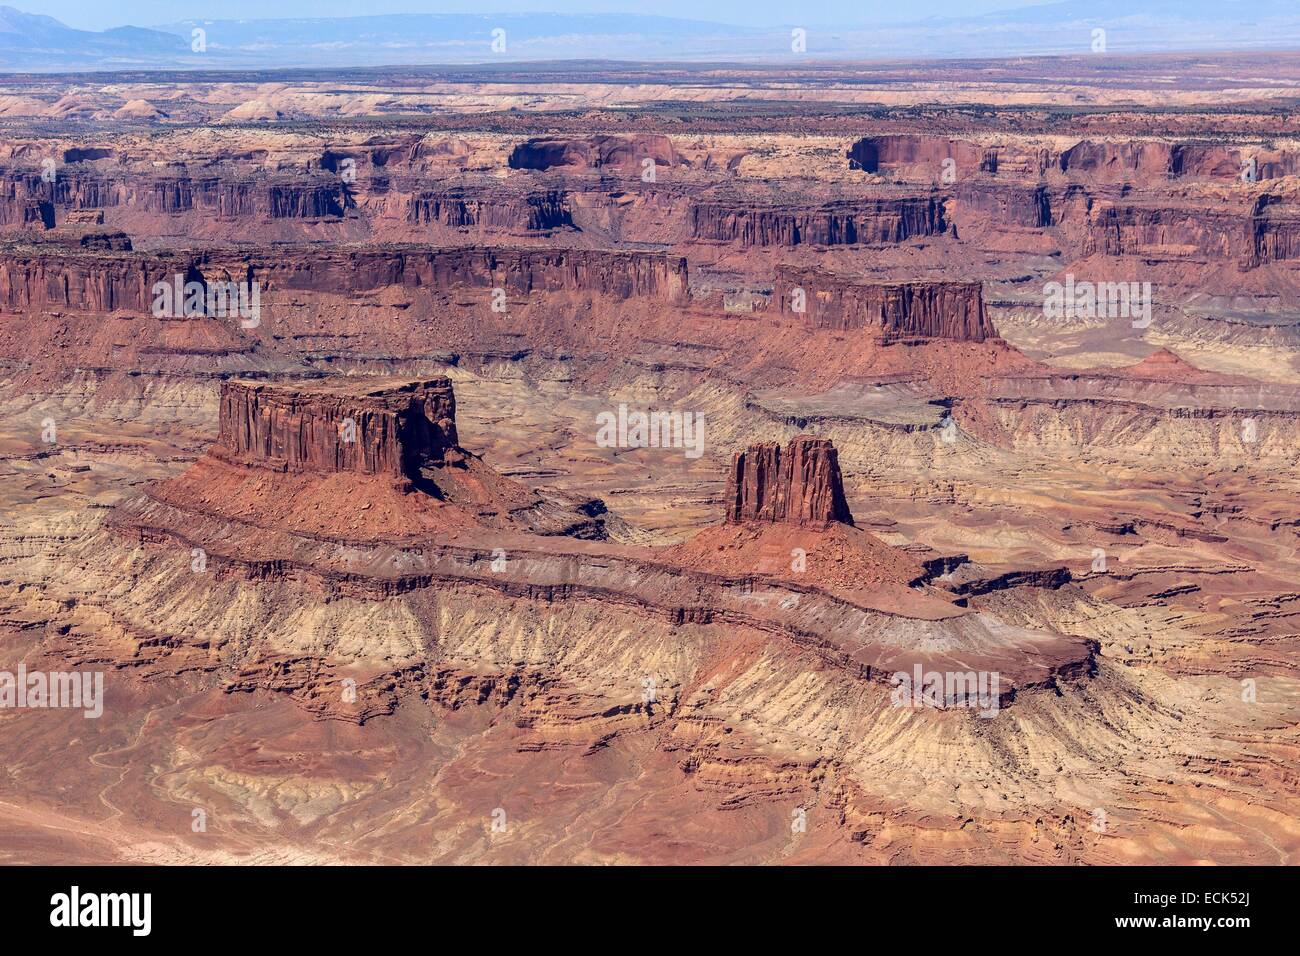 United States, Utah, Colorado Plateau, Glen Canyon National Recreation Area near Canyonlands National Park, The Buttes of the Cross with the Orange Cliffs in the background (aerial view) Stock Photo